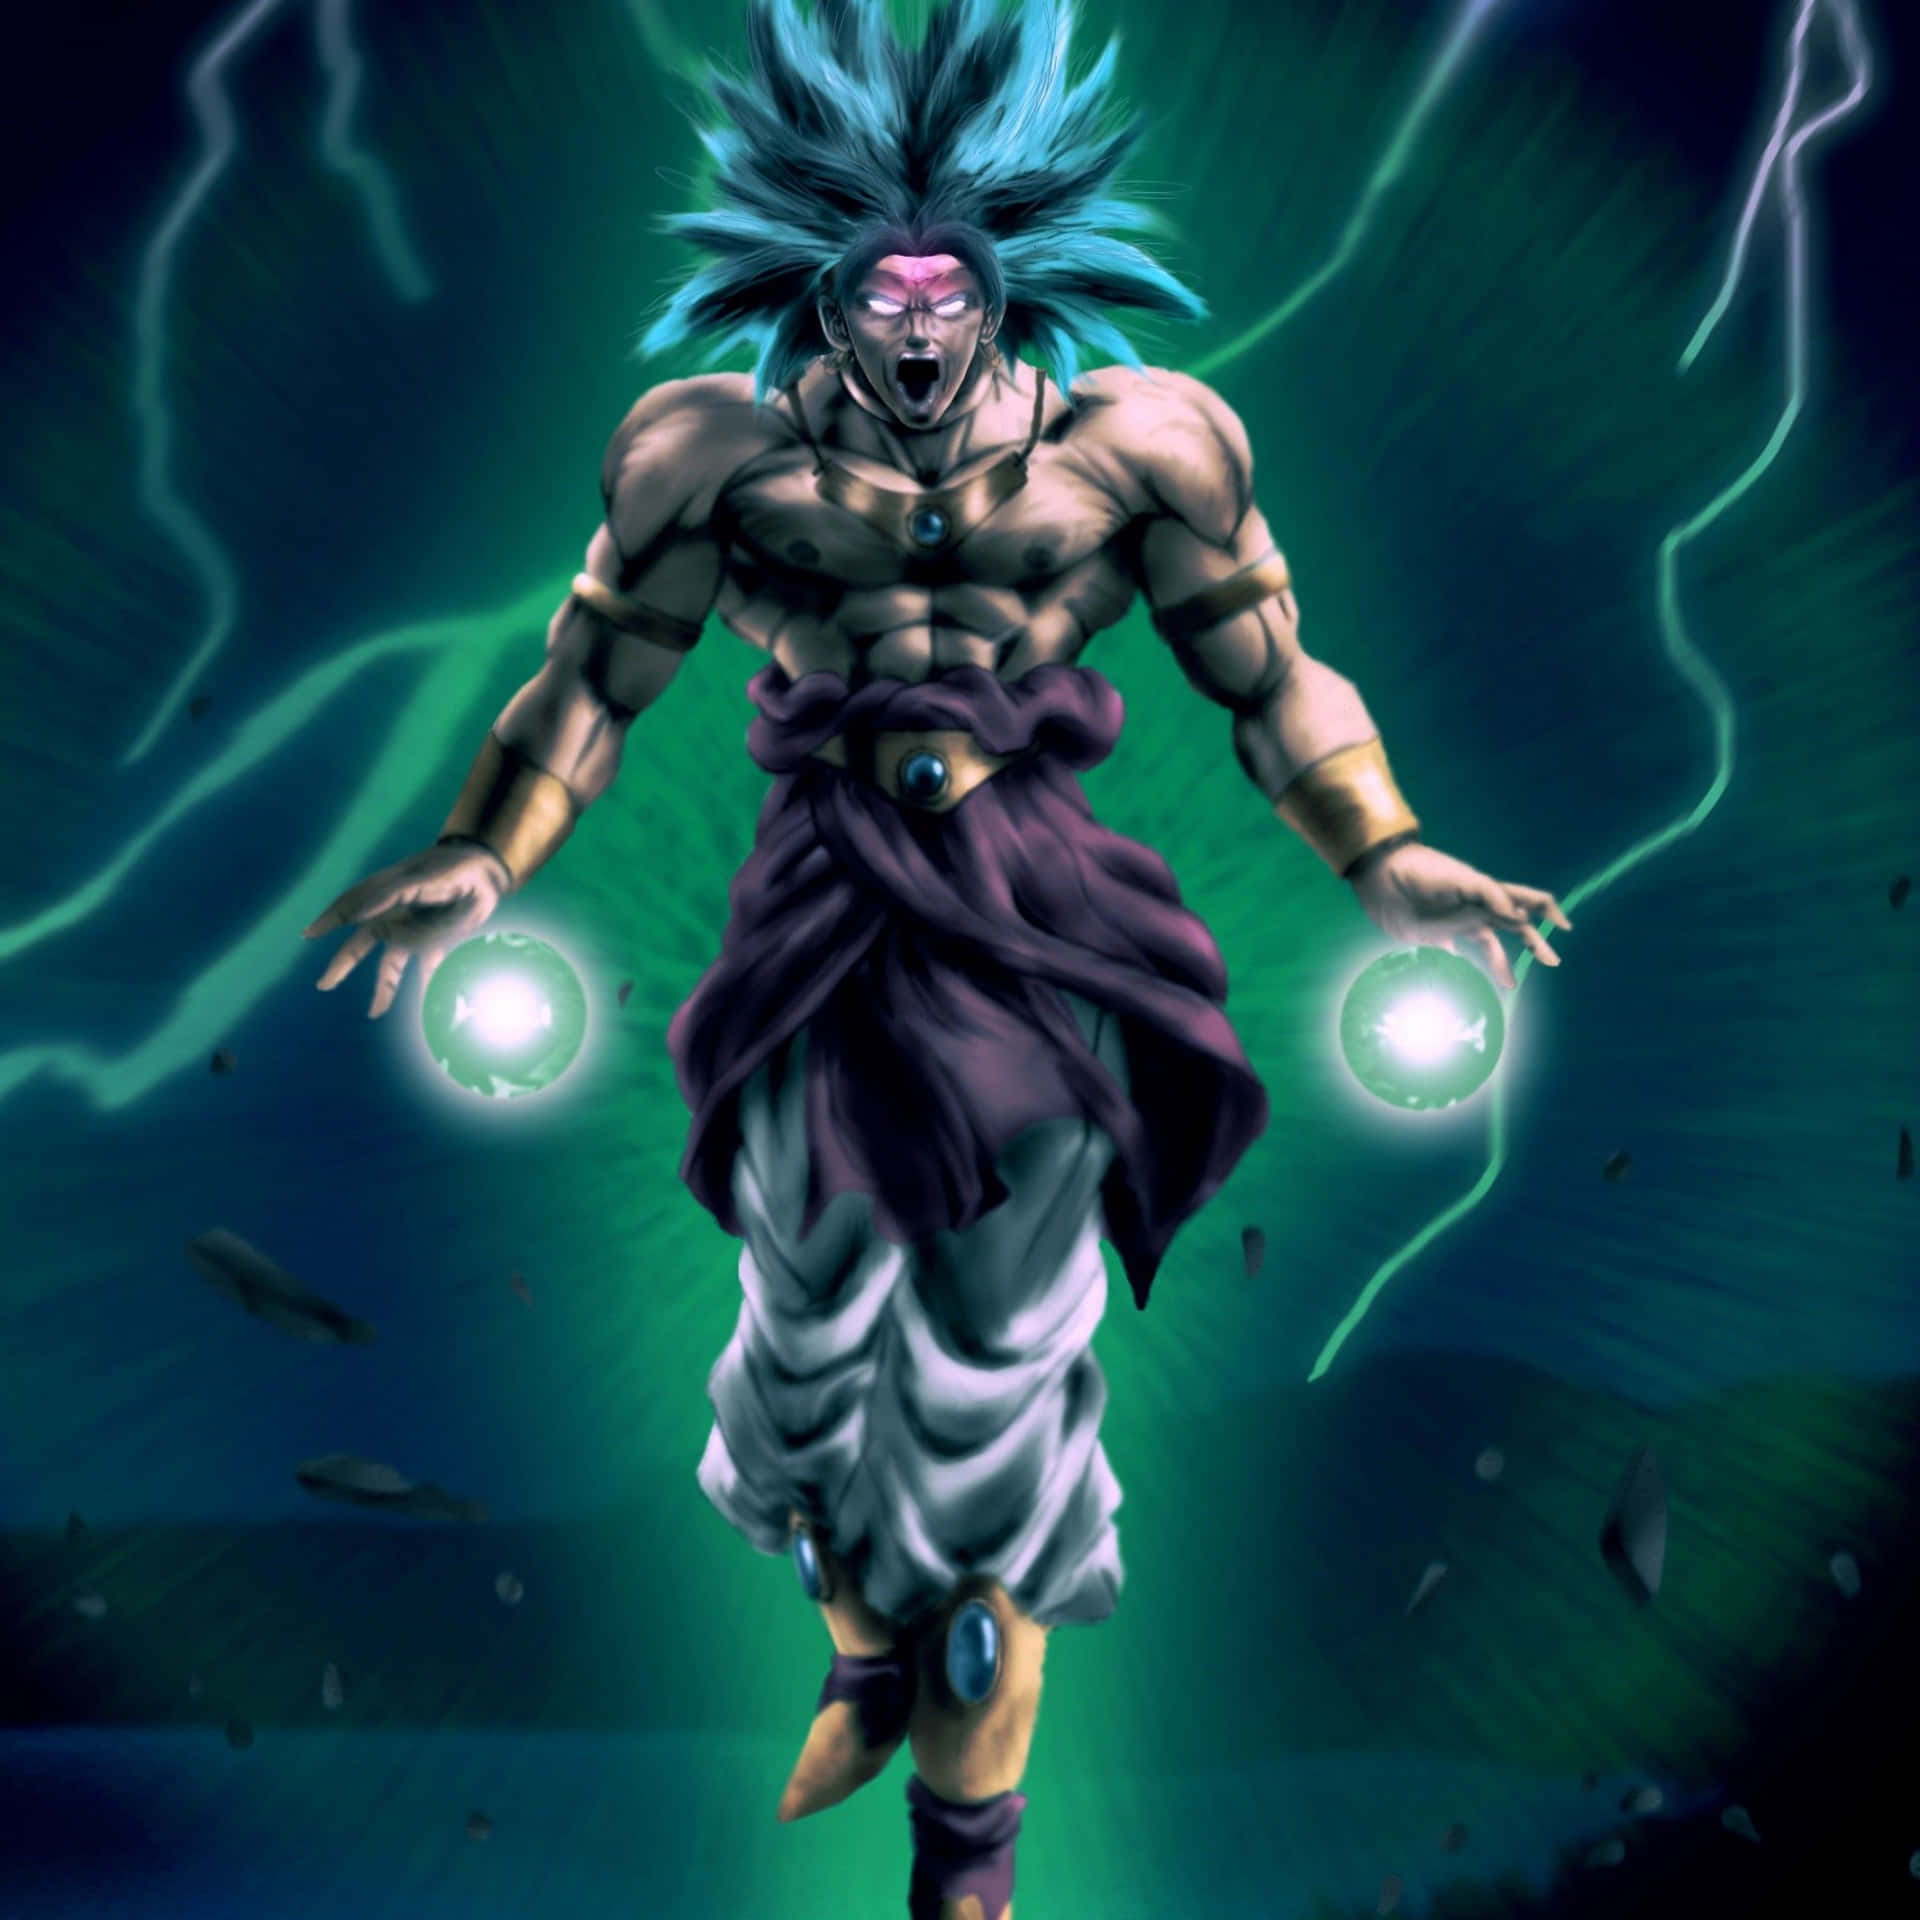 Unleash the power of Broly in Dragon Ball Z Wallpaper